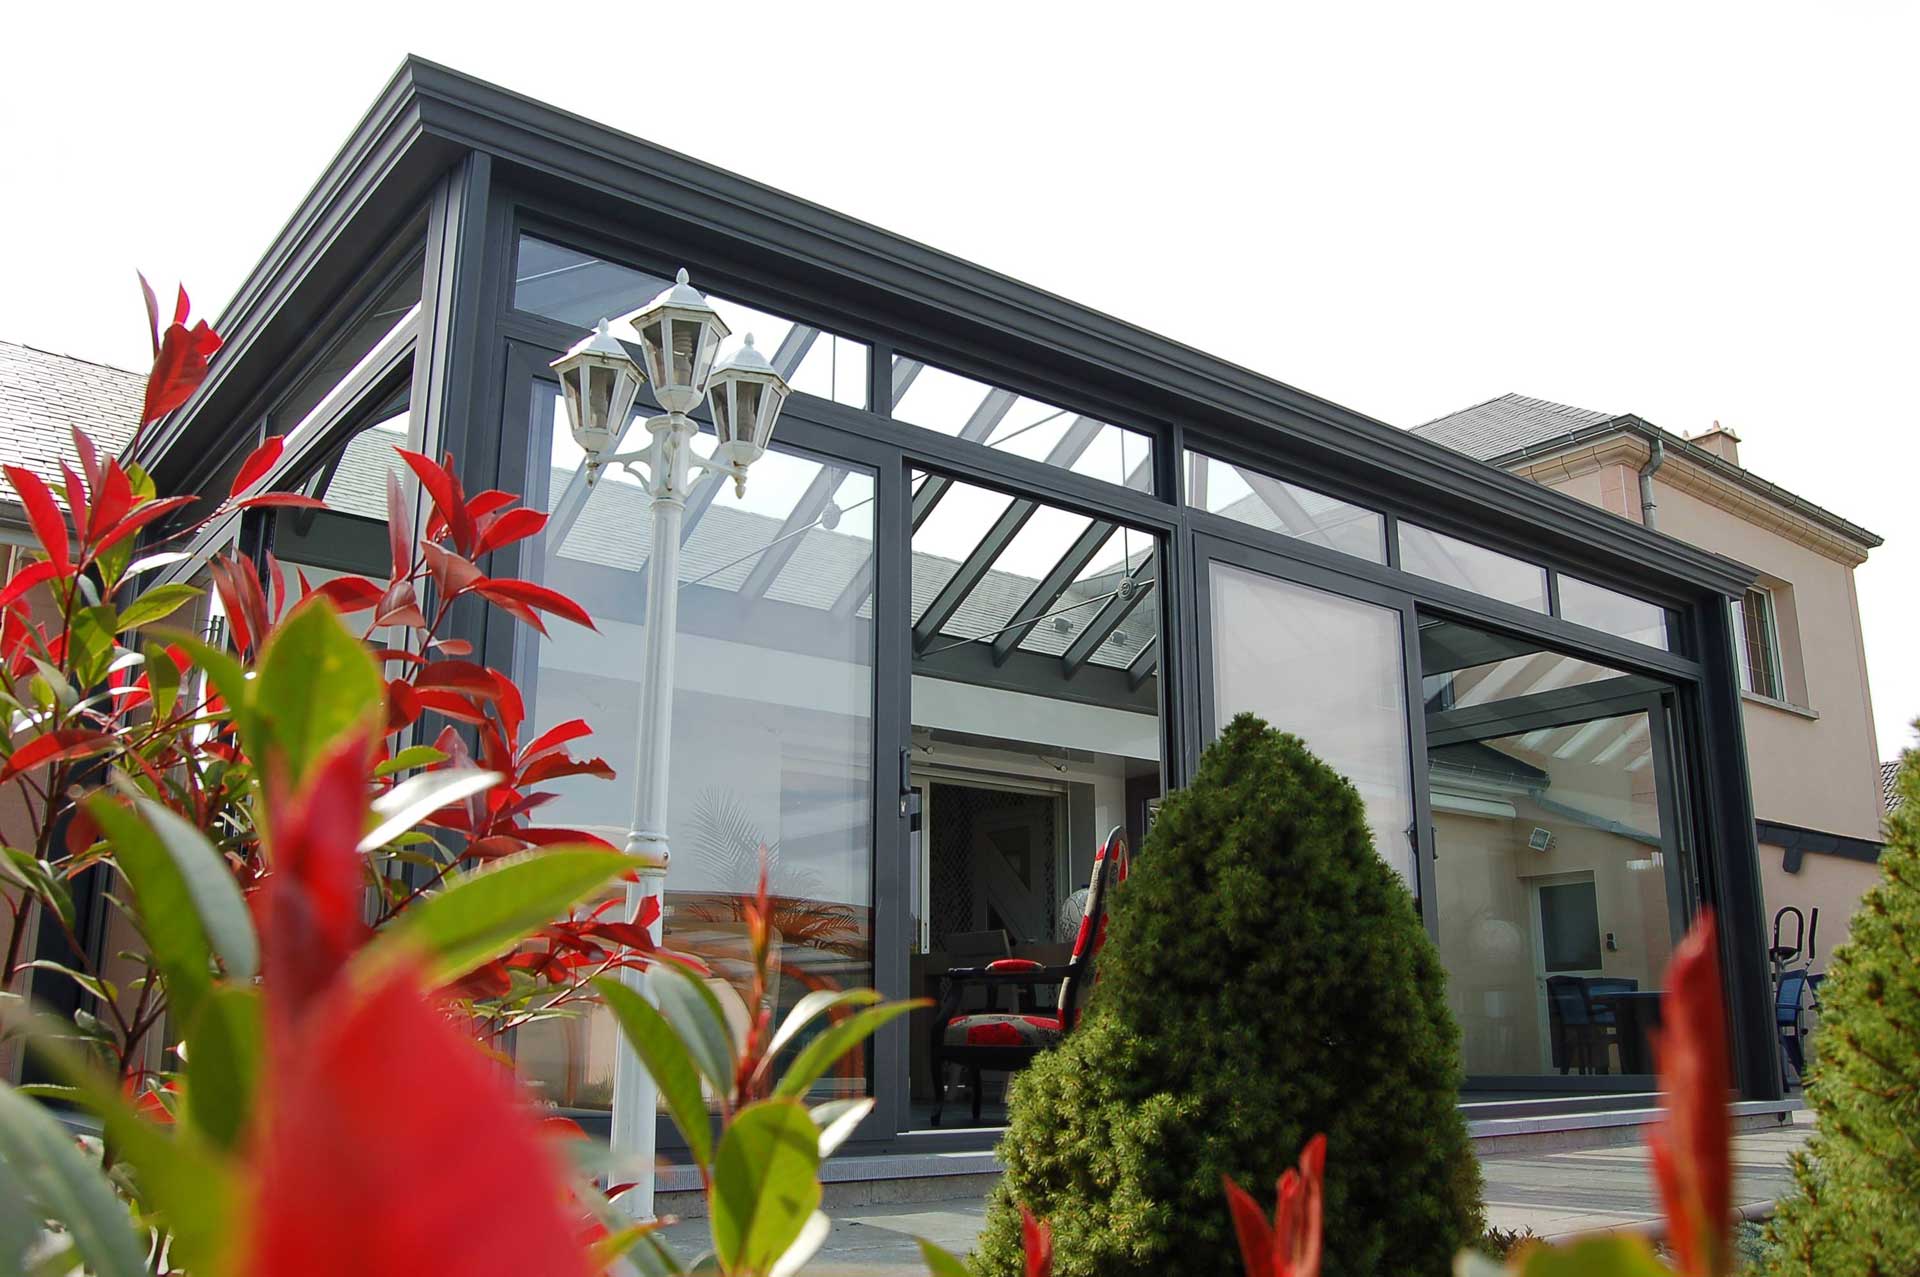 Conservatories Prices barry